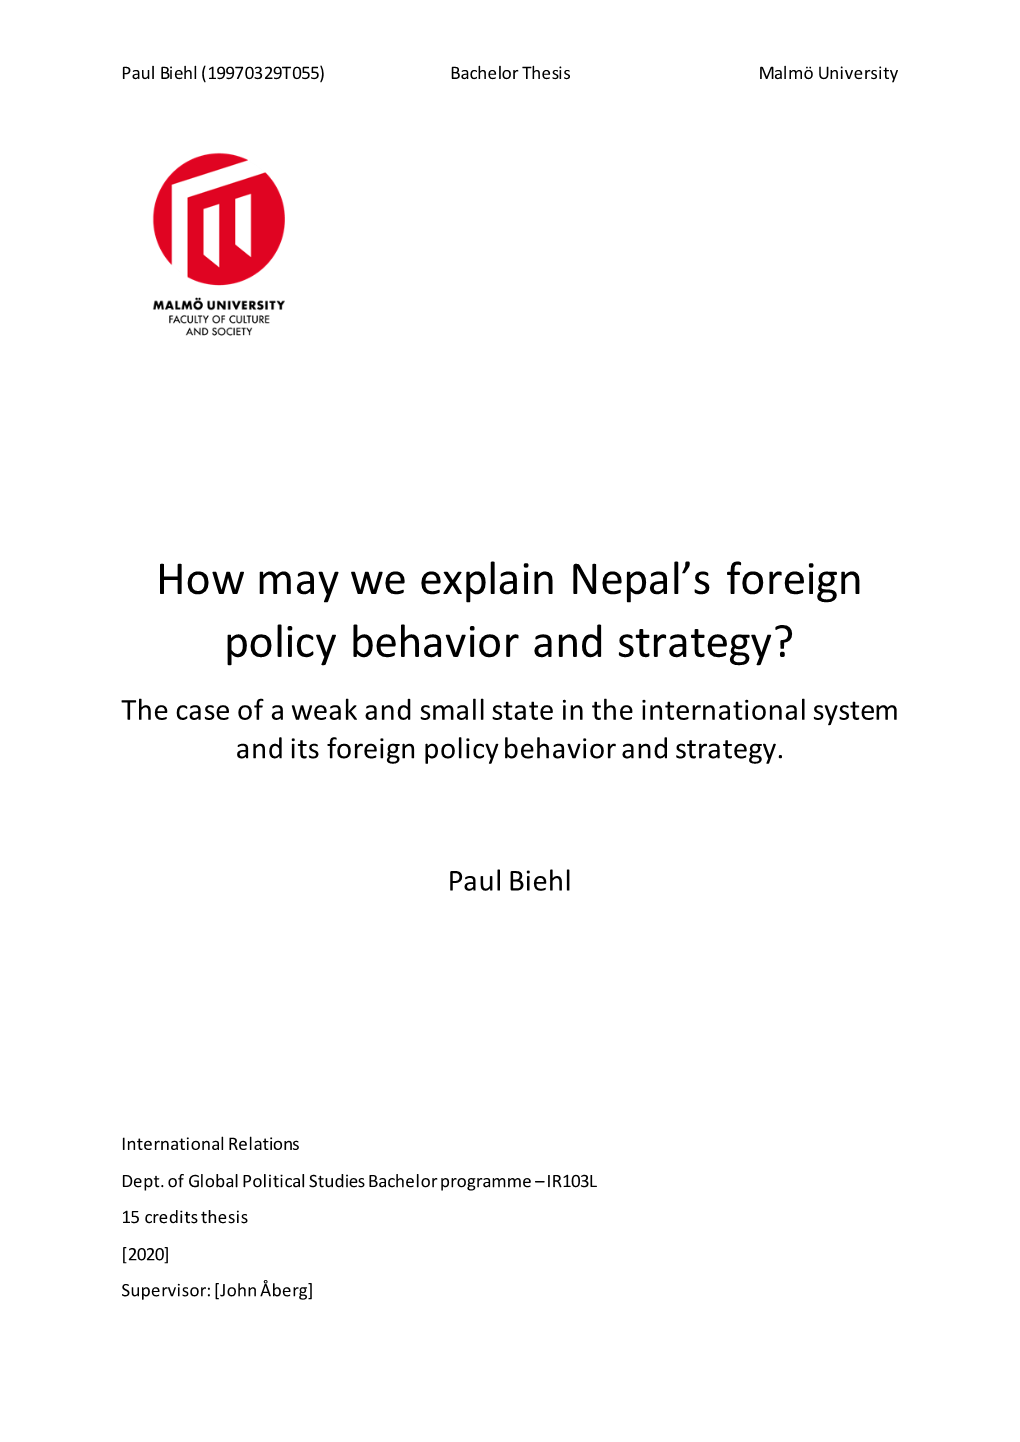 How May We Explain Nepal's Foreign Policy Behavior and Strategy?